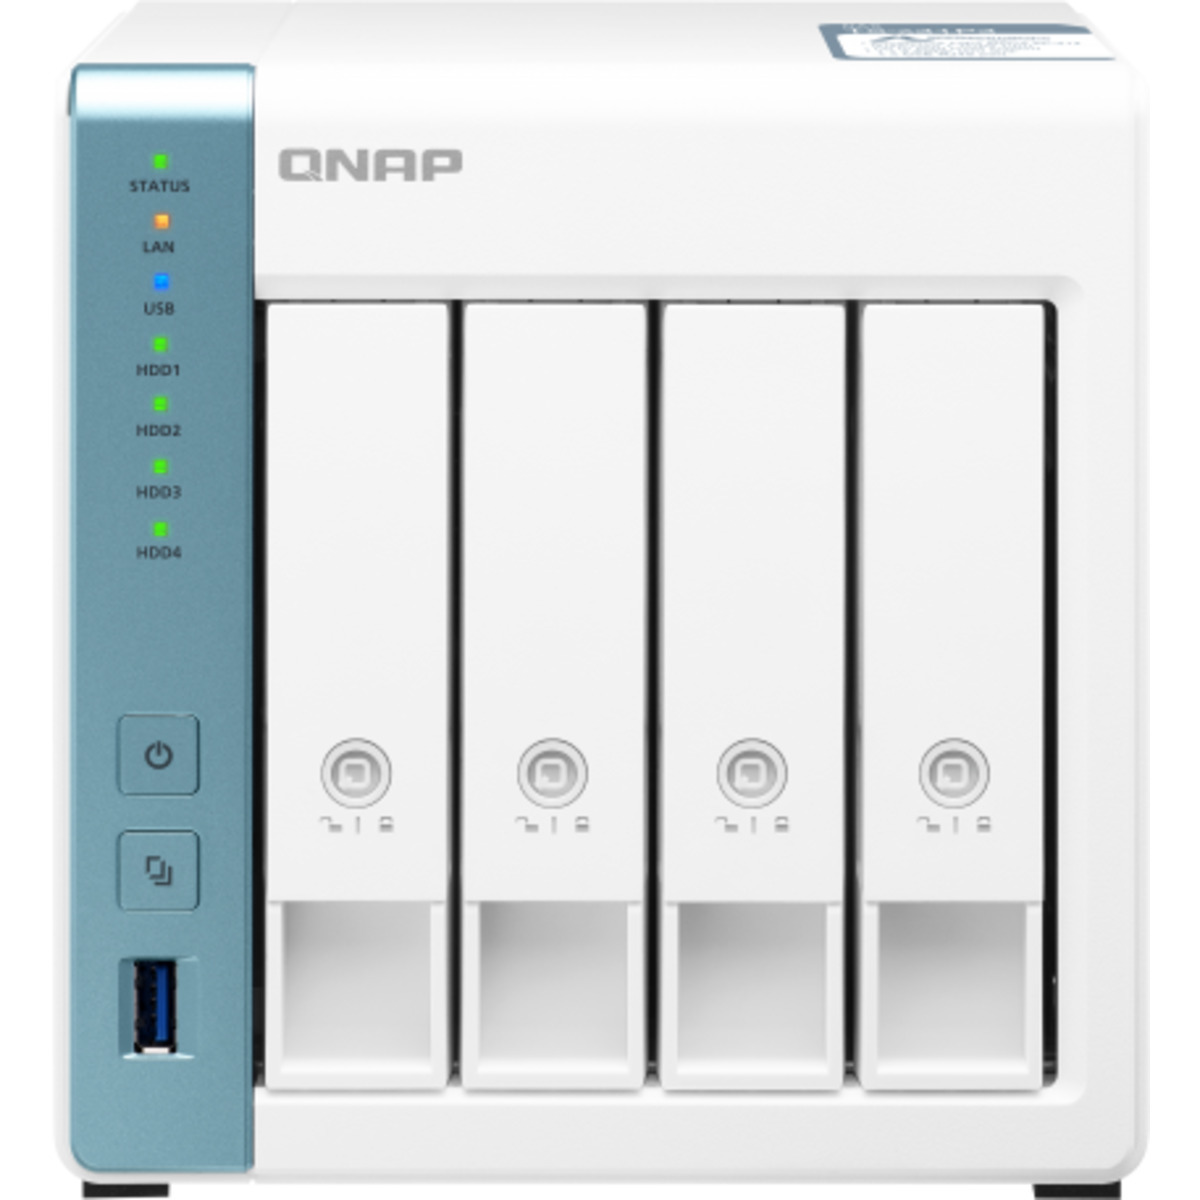 buy $804 QNAP TS-431P3 8tb Desktop NAS - Network Attached Storage Device 4x2000gb Seagate BarraCuda ST2000DM008 3.5 7200rpm SATA 6Gb/s HDD CONSUMER Class Drives Installed - Burn-In Tested - ON SALE - FREE RAM UPGRADE - nas headquarters buy network attached storage server device das new raid-5 free shipping usa christmas new year holiday sale TS-431P3